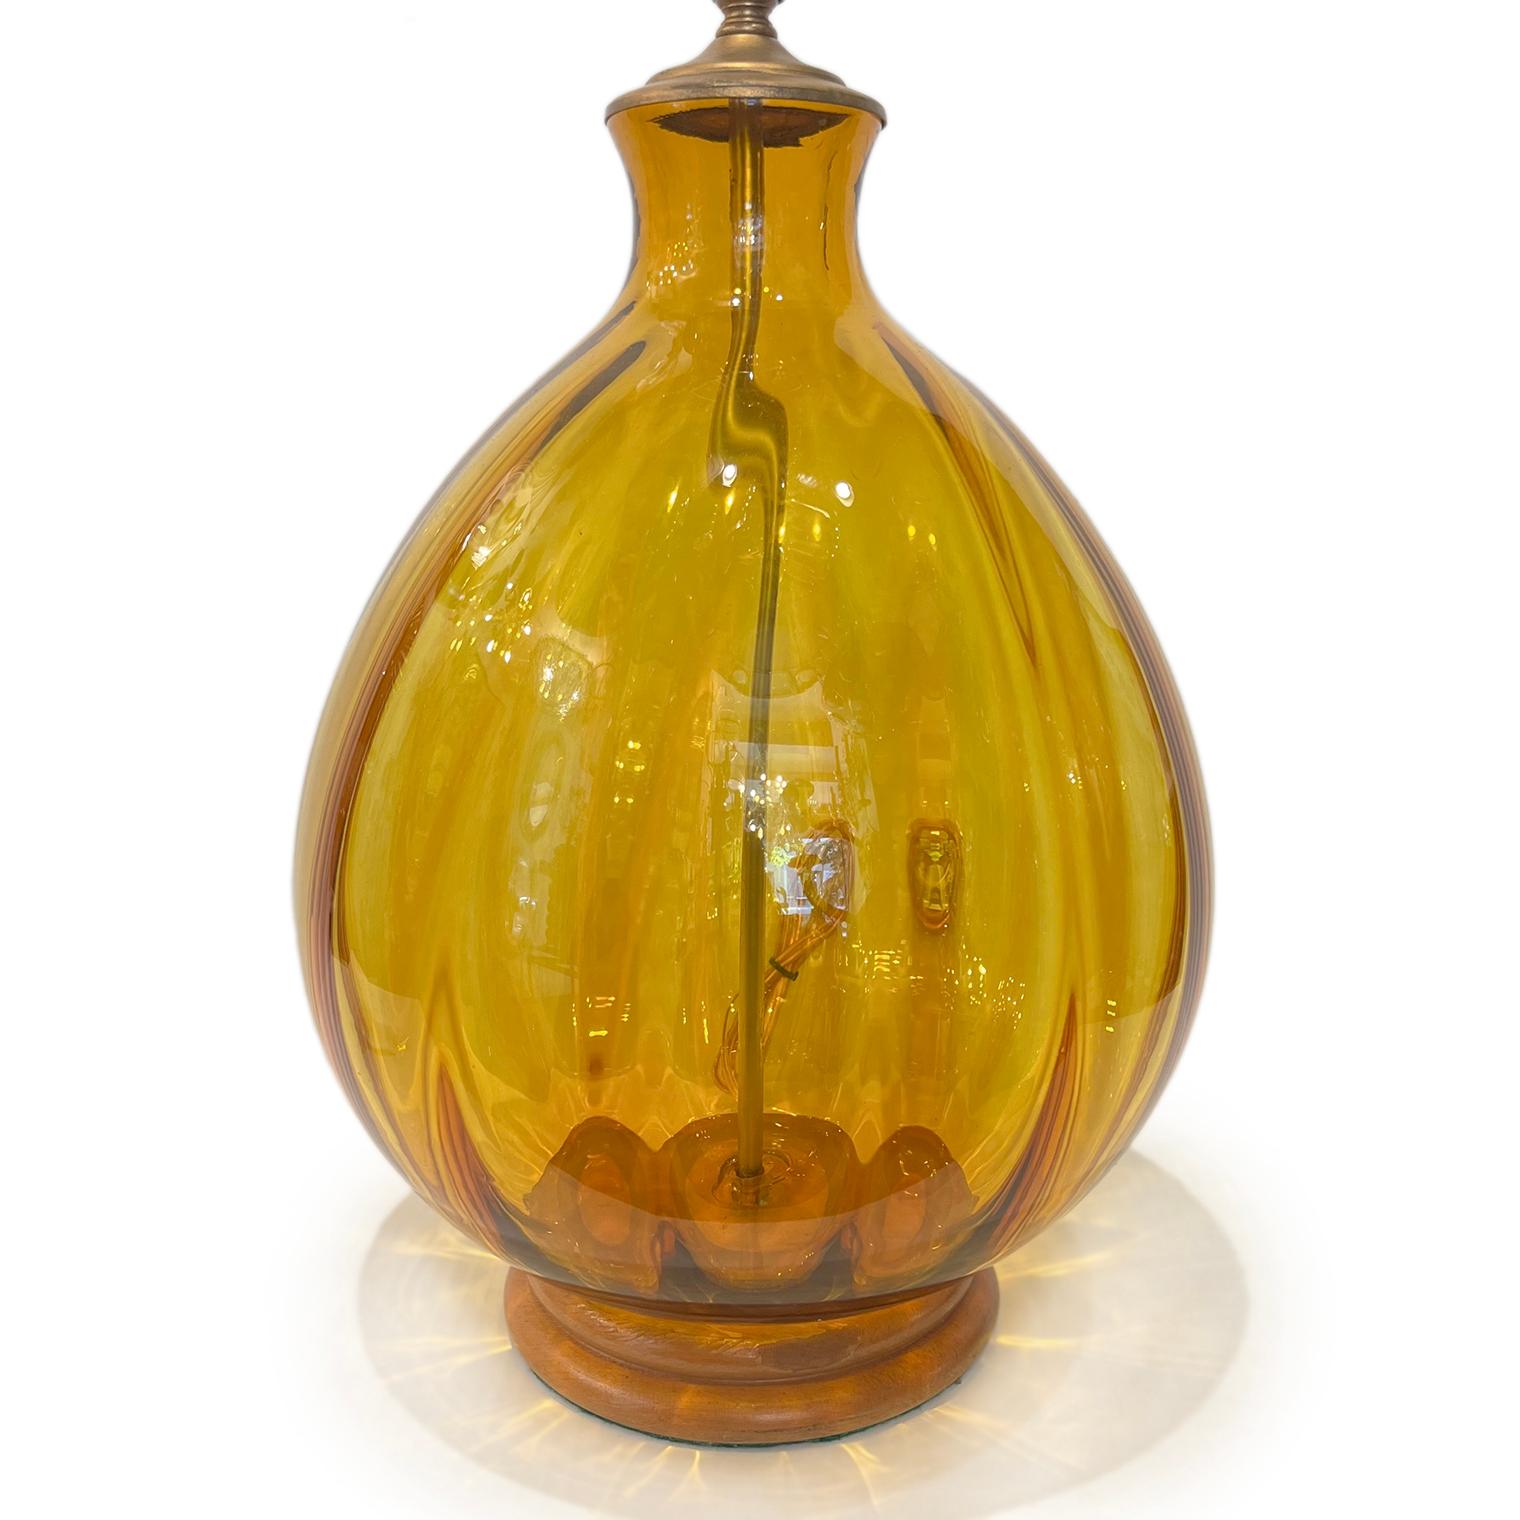 A single circa 1960s Italian amber glass table lamp.

Measurements:
Height of body: 15.75